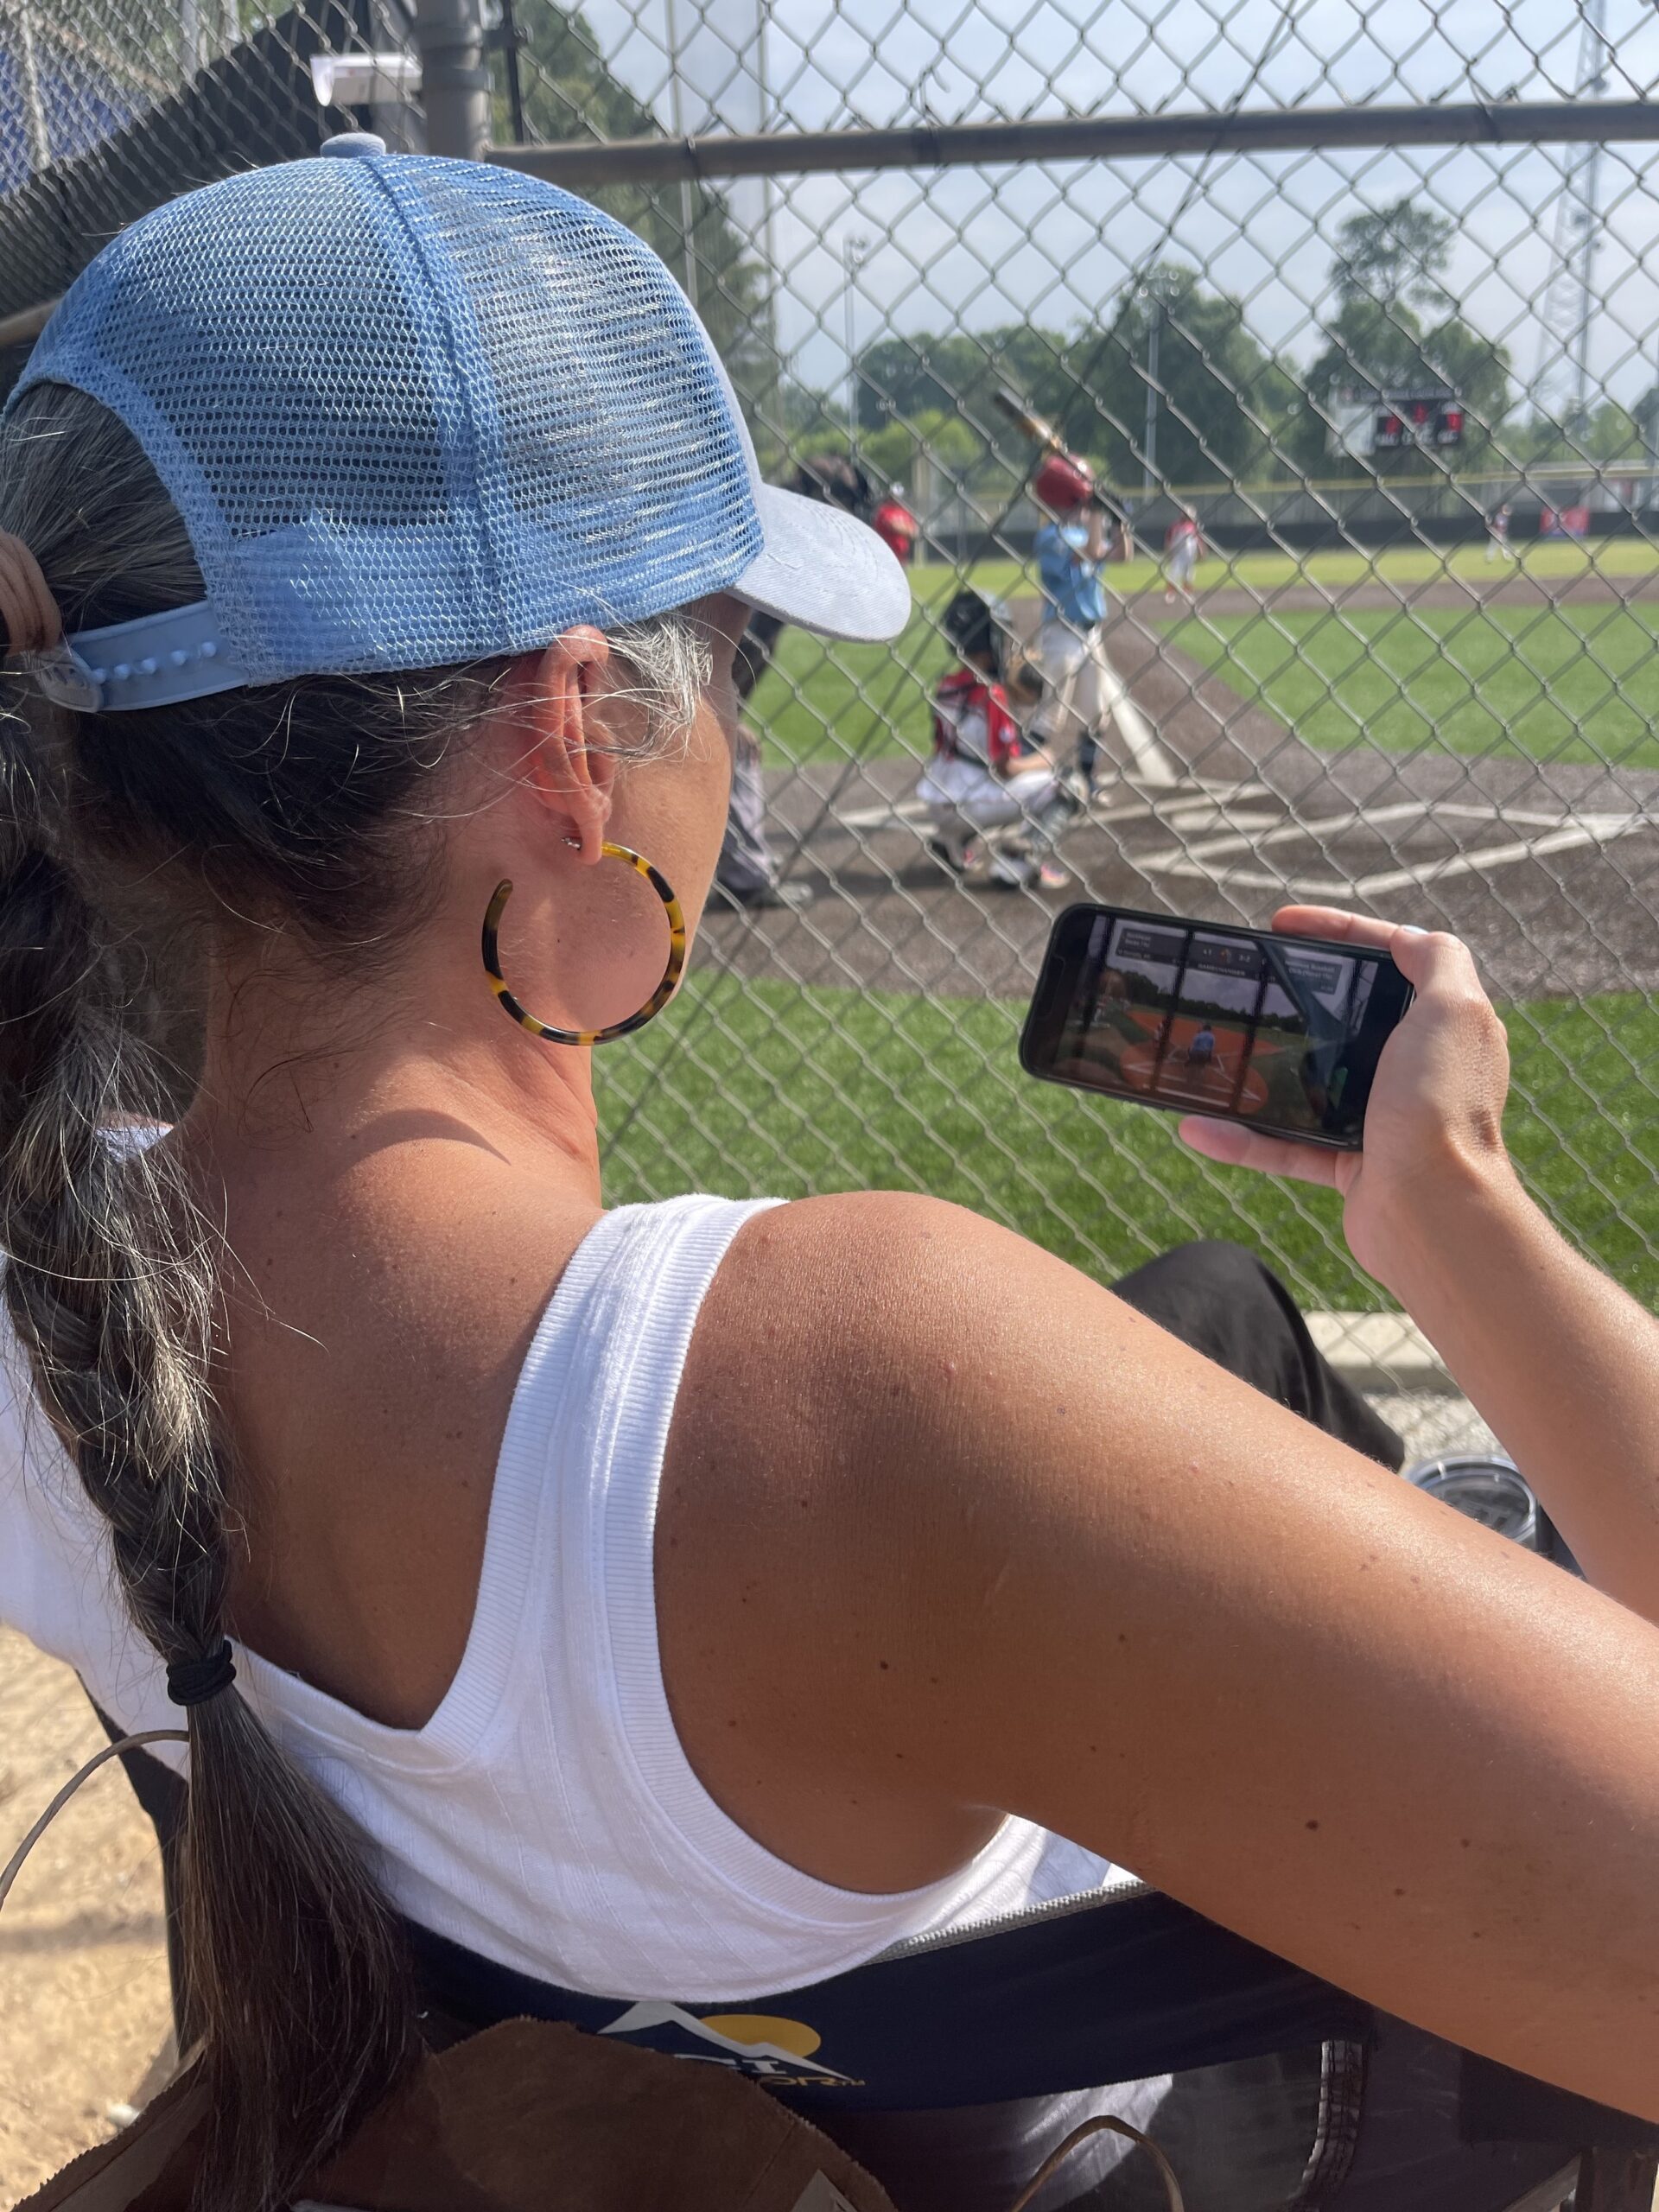 A woman watches a baseball game on her phone while watching another one on the sidelines.